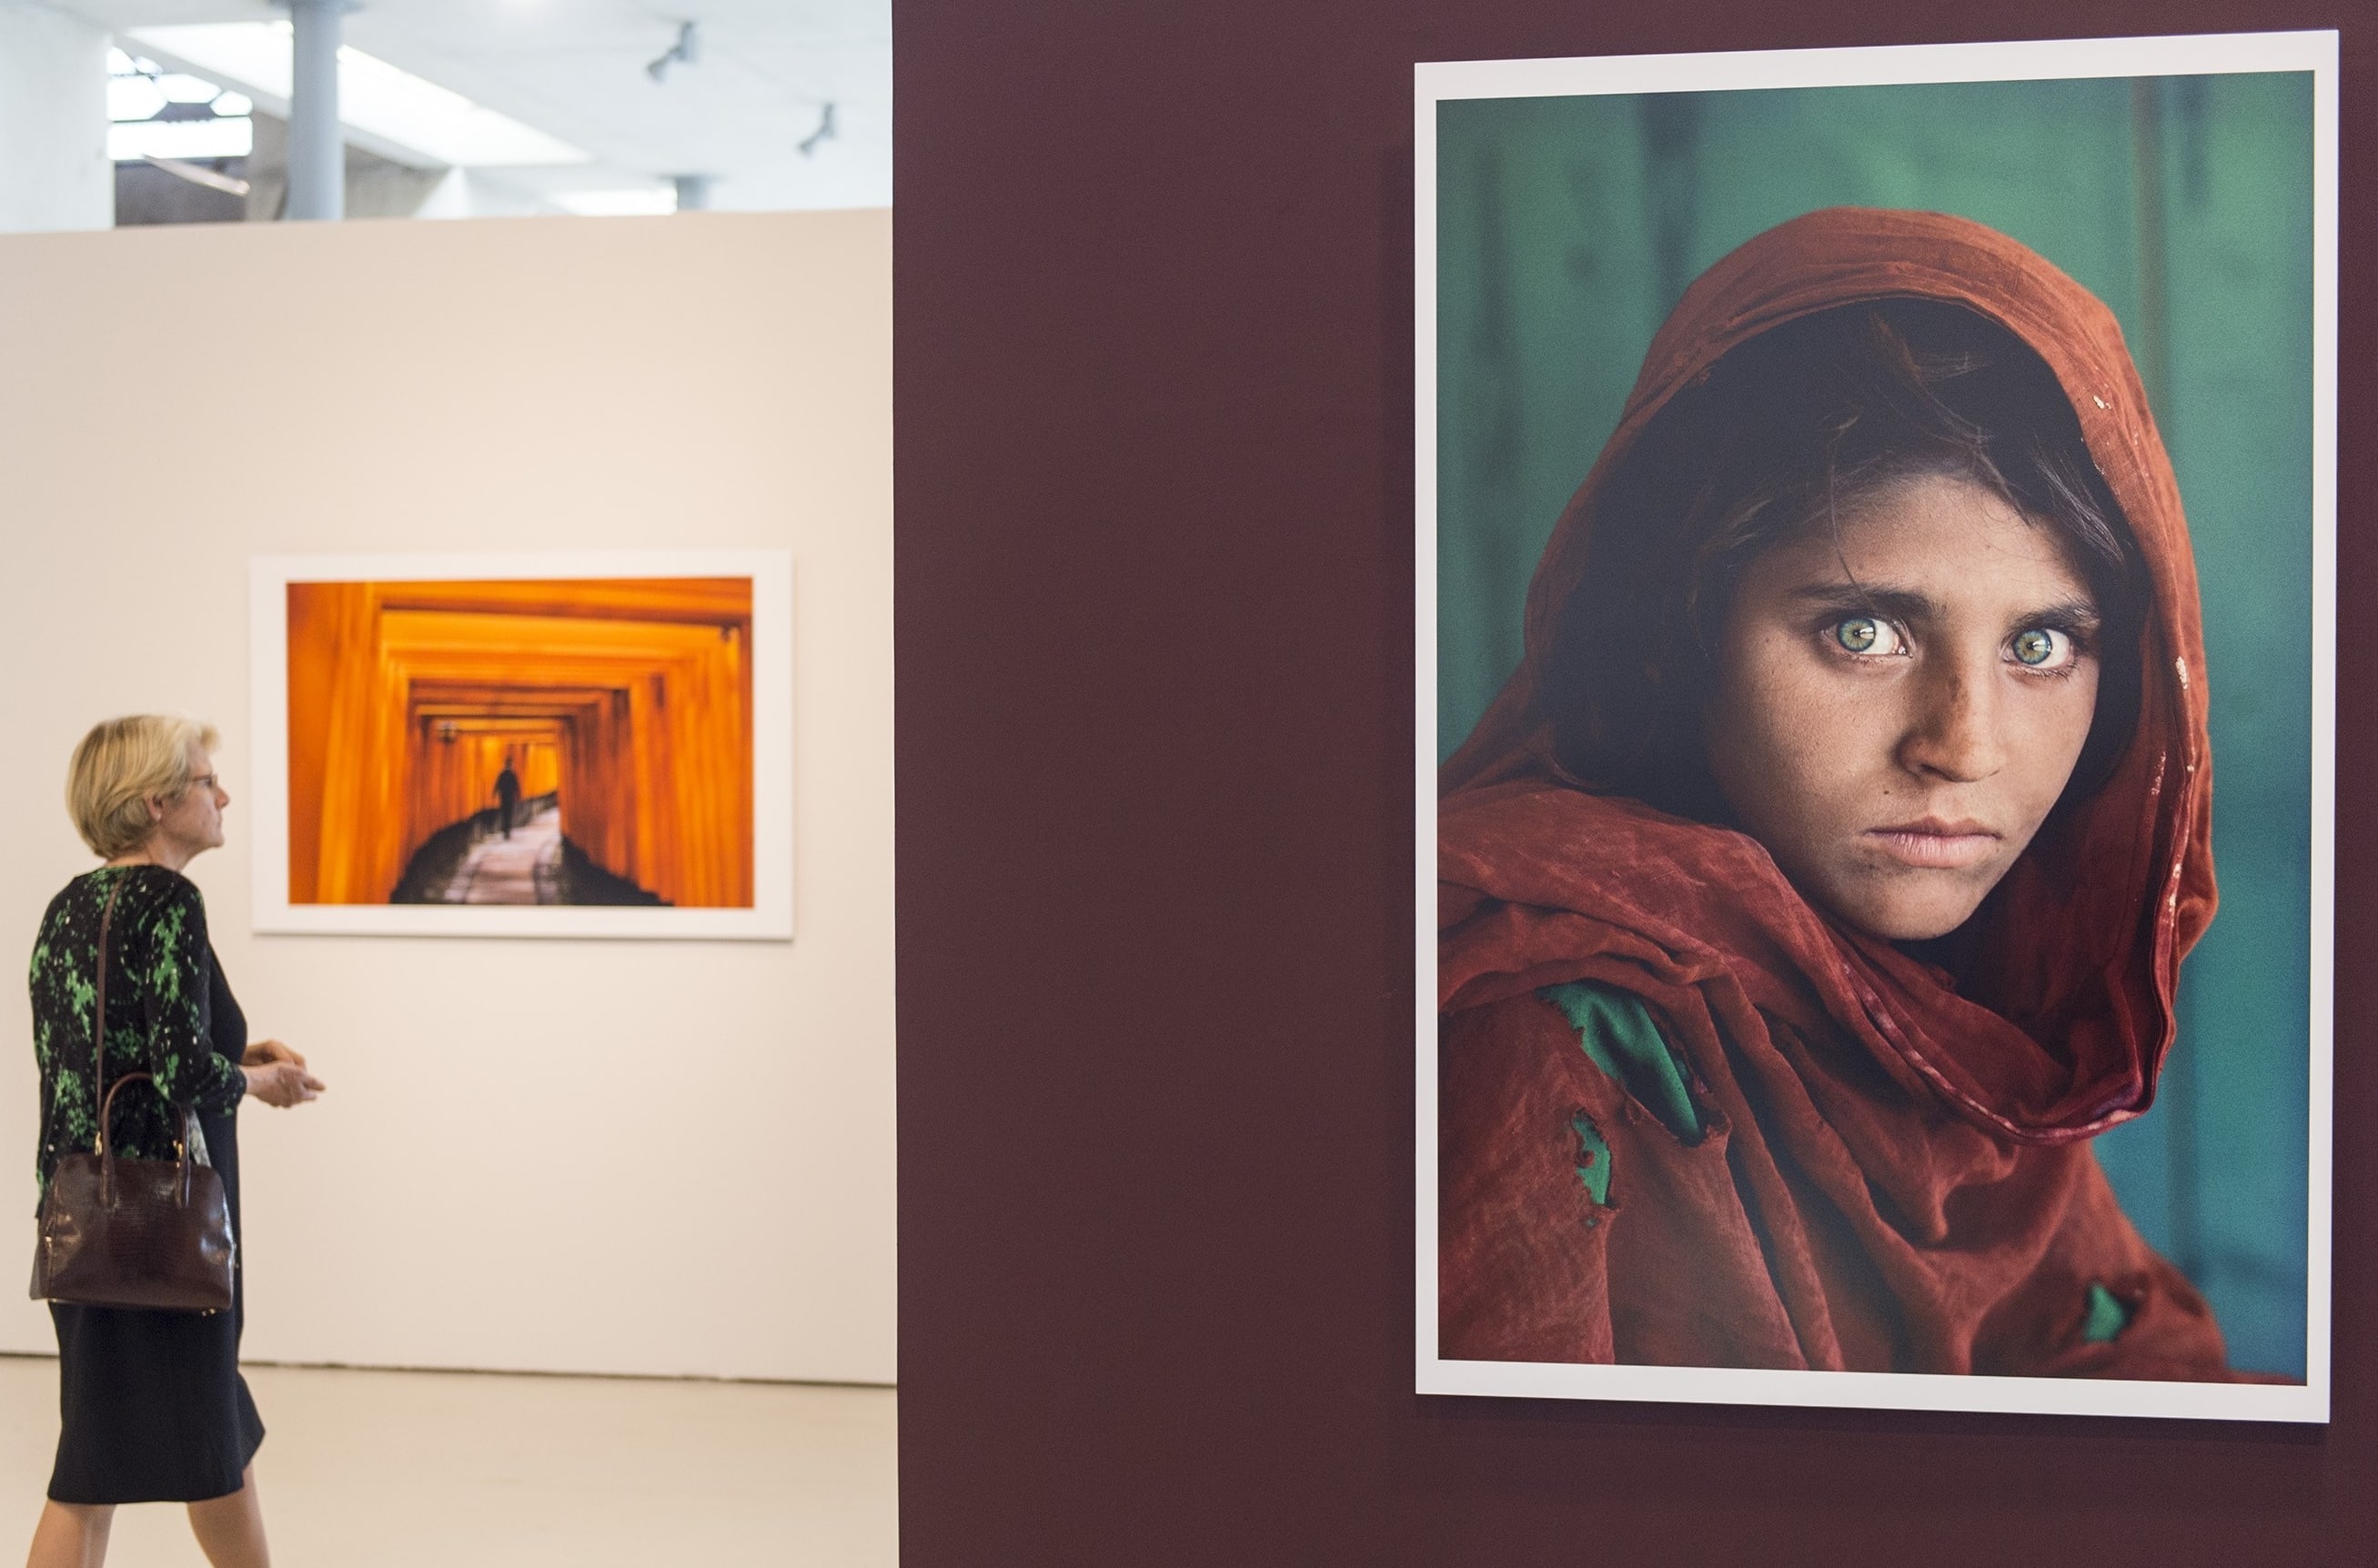 American photographer Steve McCurry's iconic photo 'Afghan Girl', taken of Sharbat Gula in 1985, is displayed at an exhibition in Turkey in 2015.